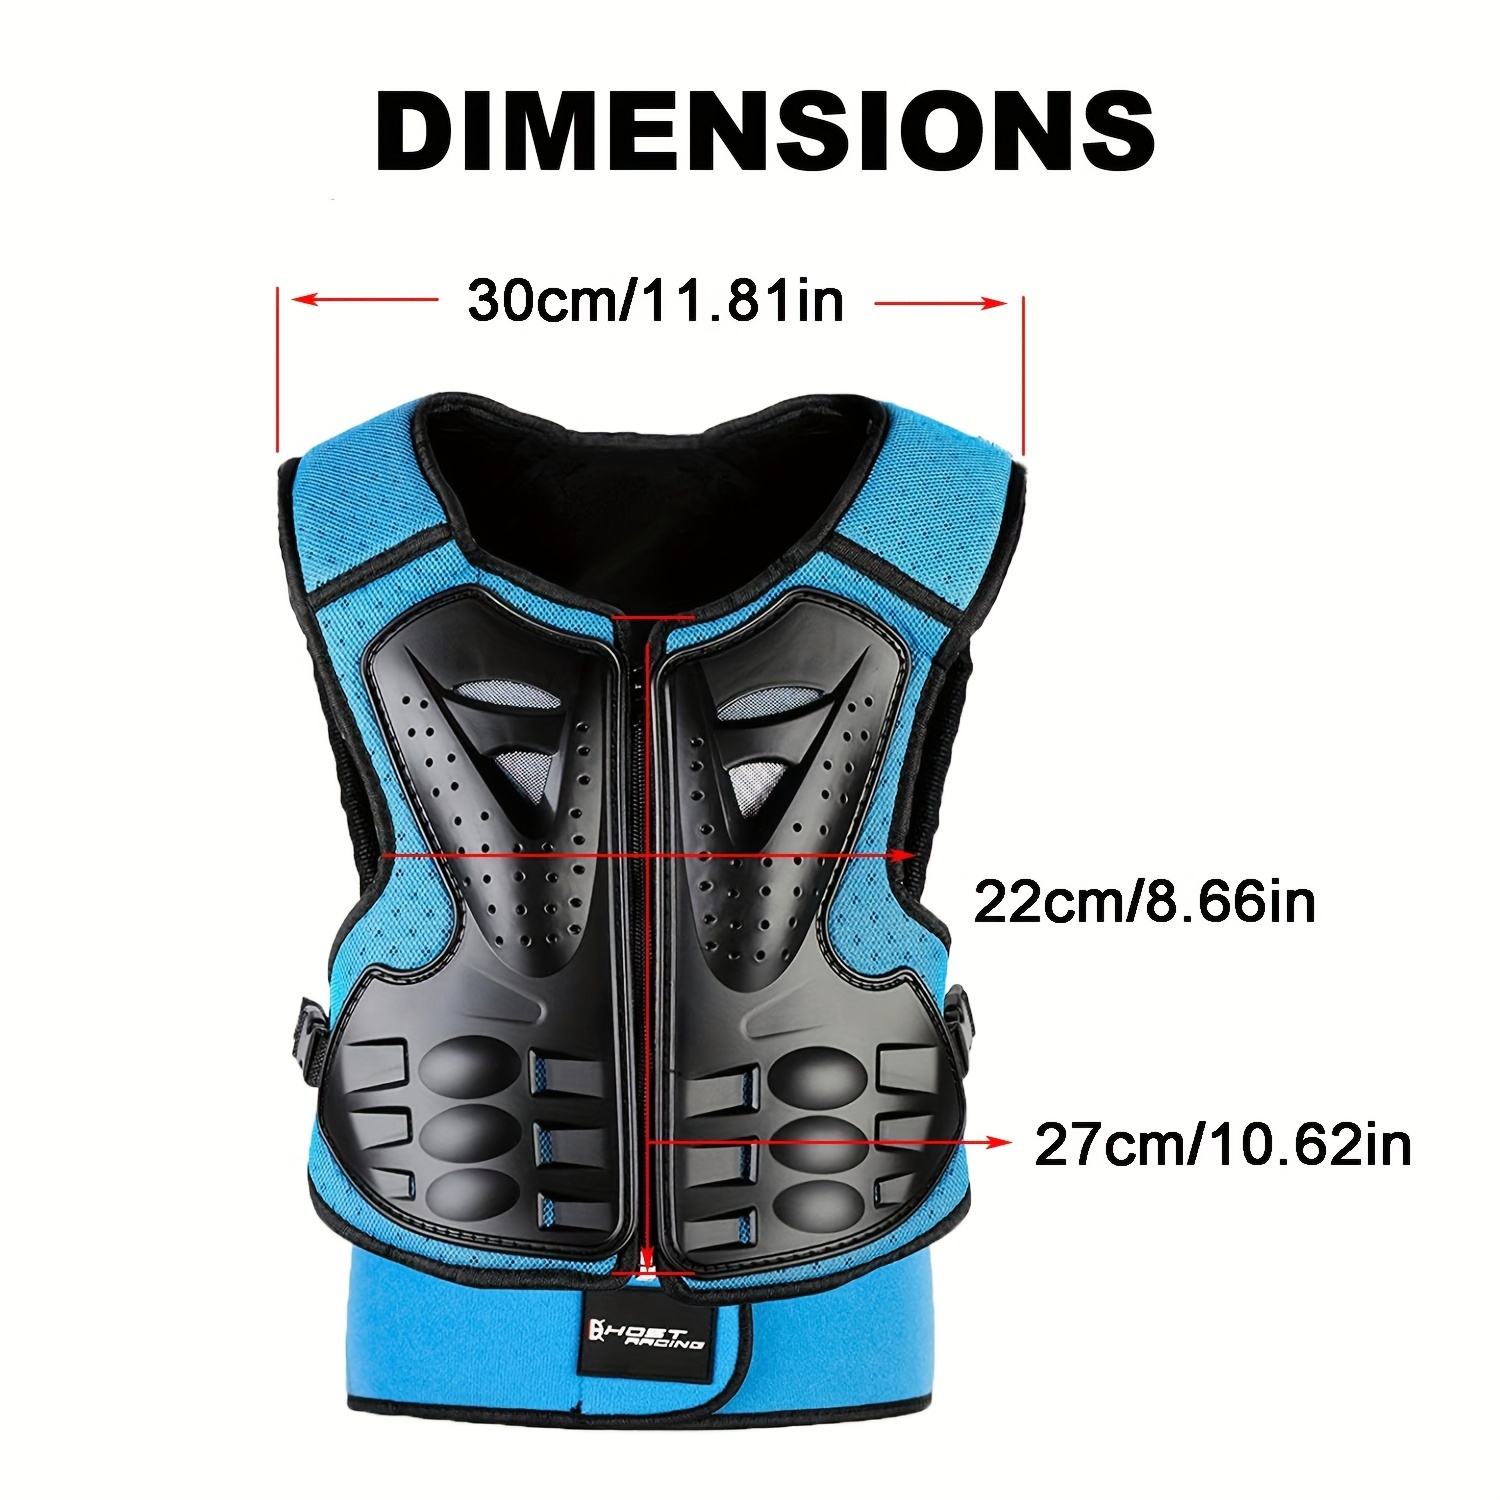 Kids Chest Protector, Dirt Bike Motorcycle Motocross Protective Armor, Youth Riding Biking Vest Jacket, Full Body Back Spine Armor Gear Guard